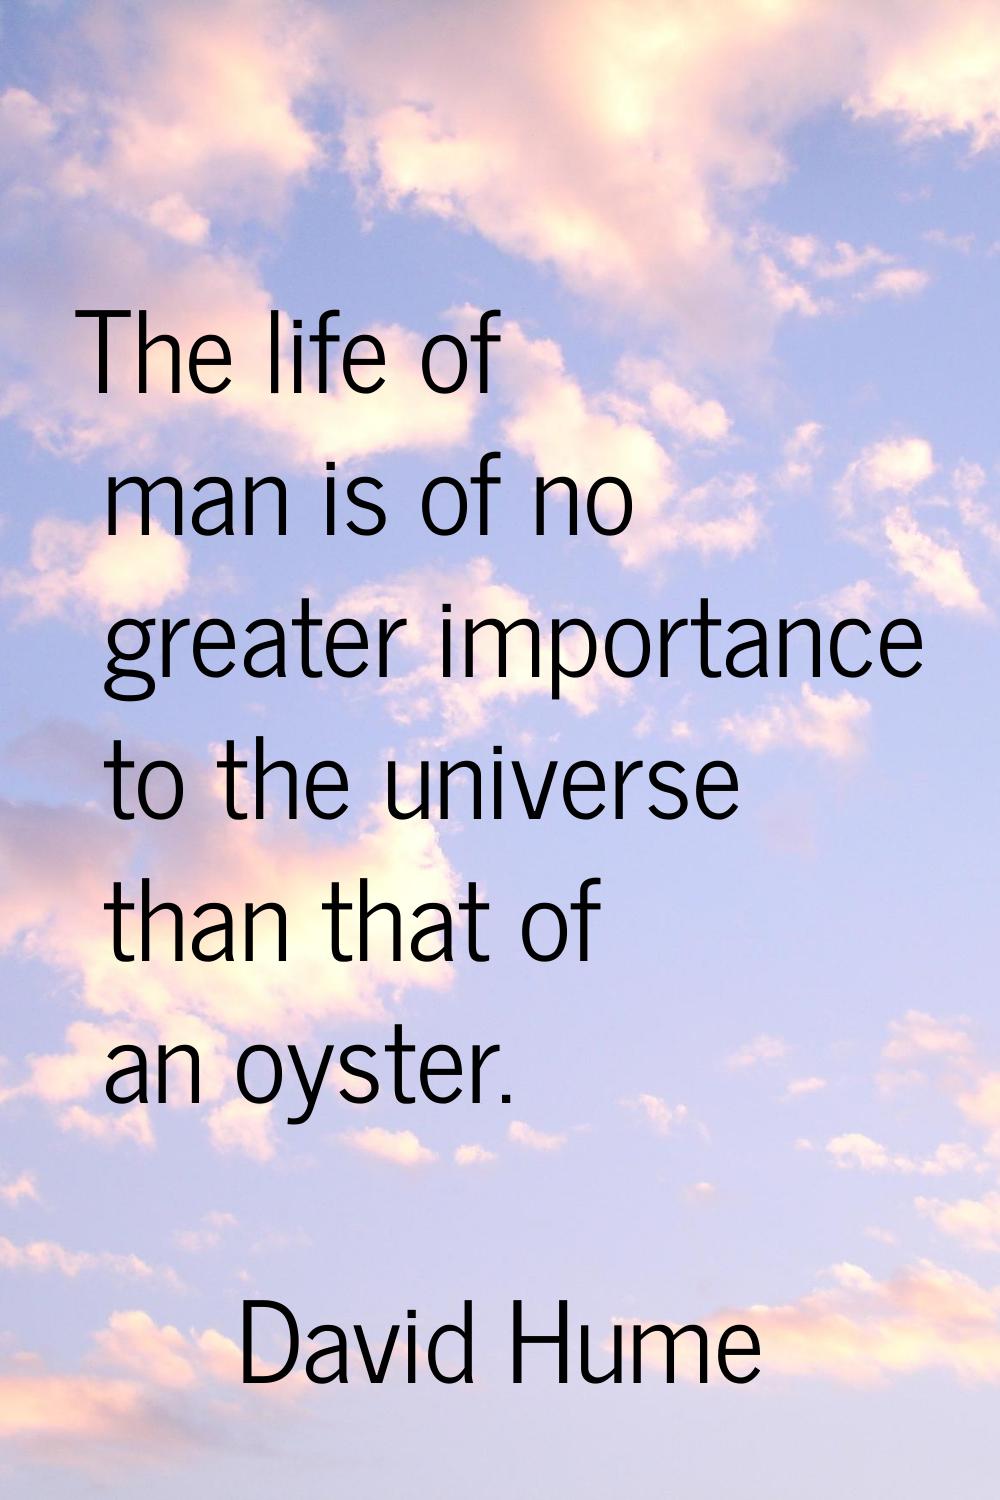 The life of man is of no greater importance to the universe than that of an oyster.